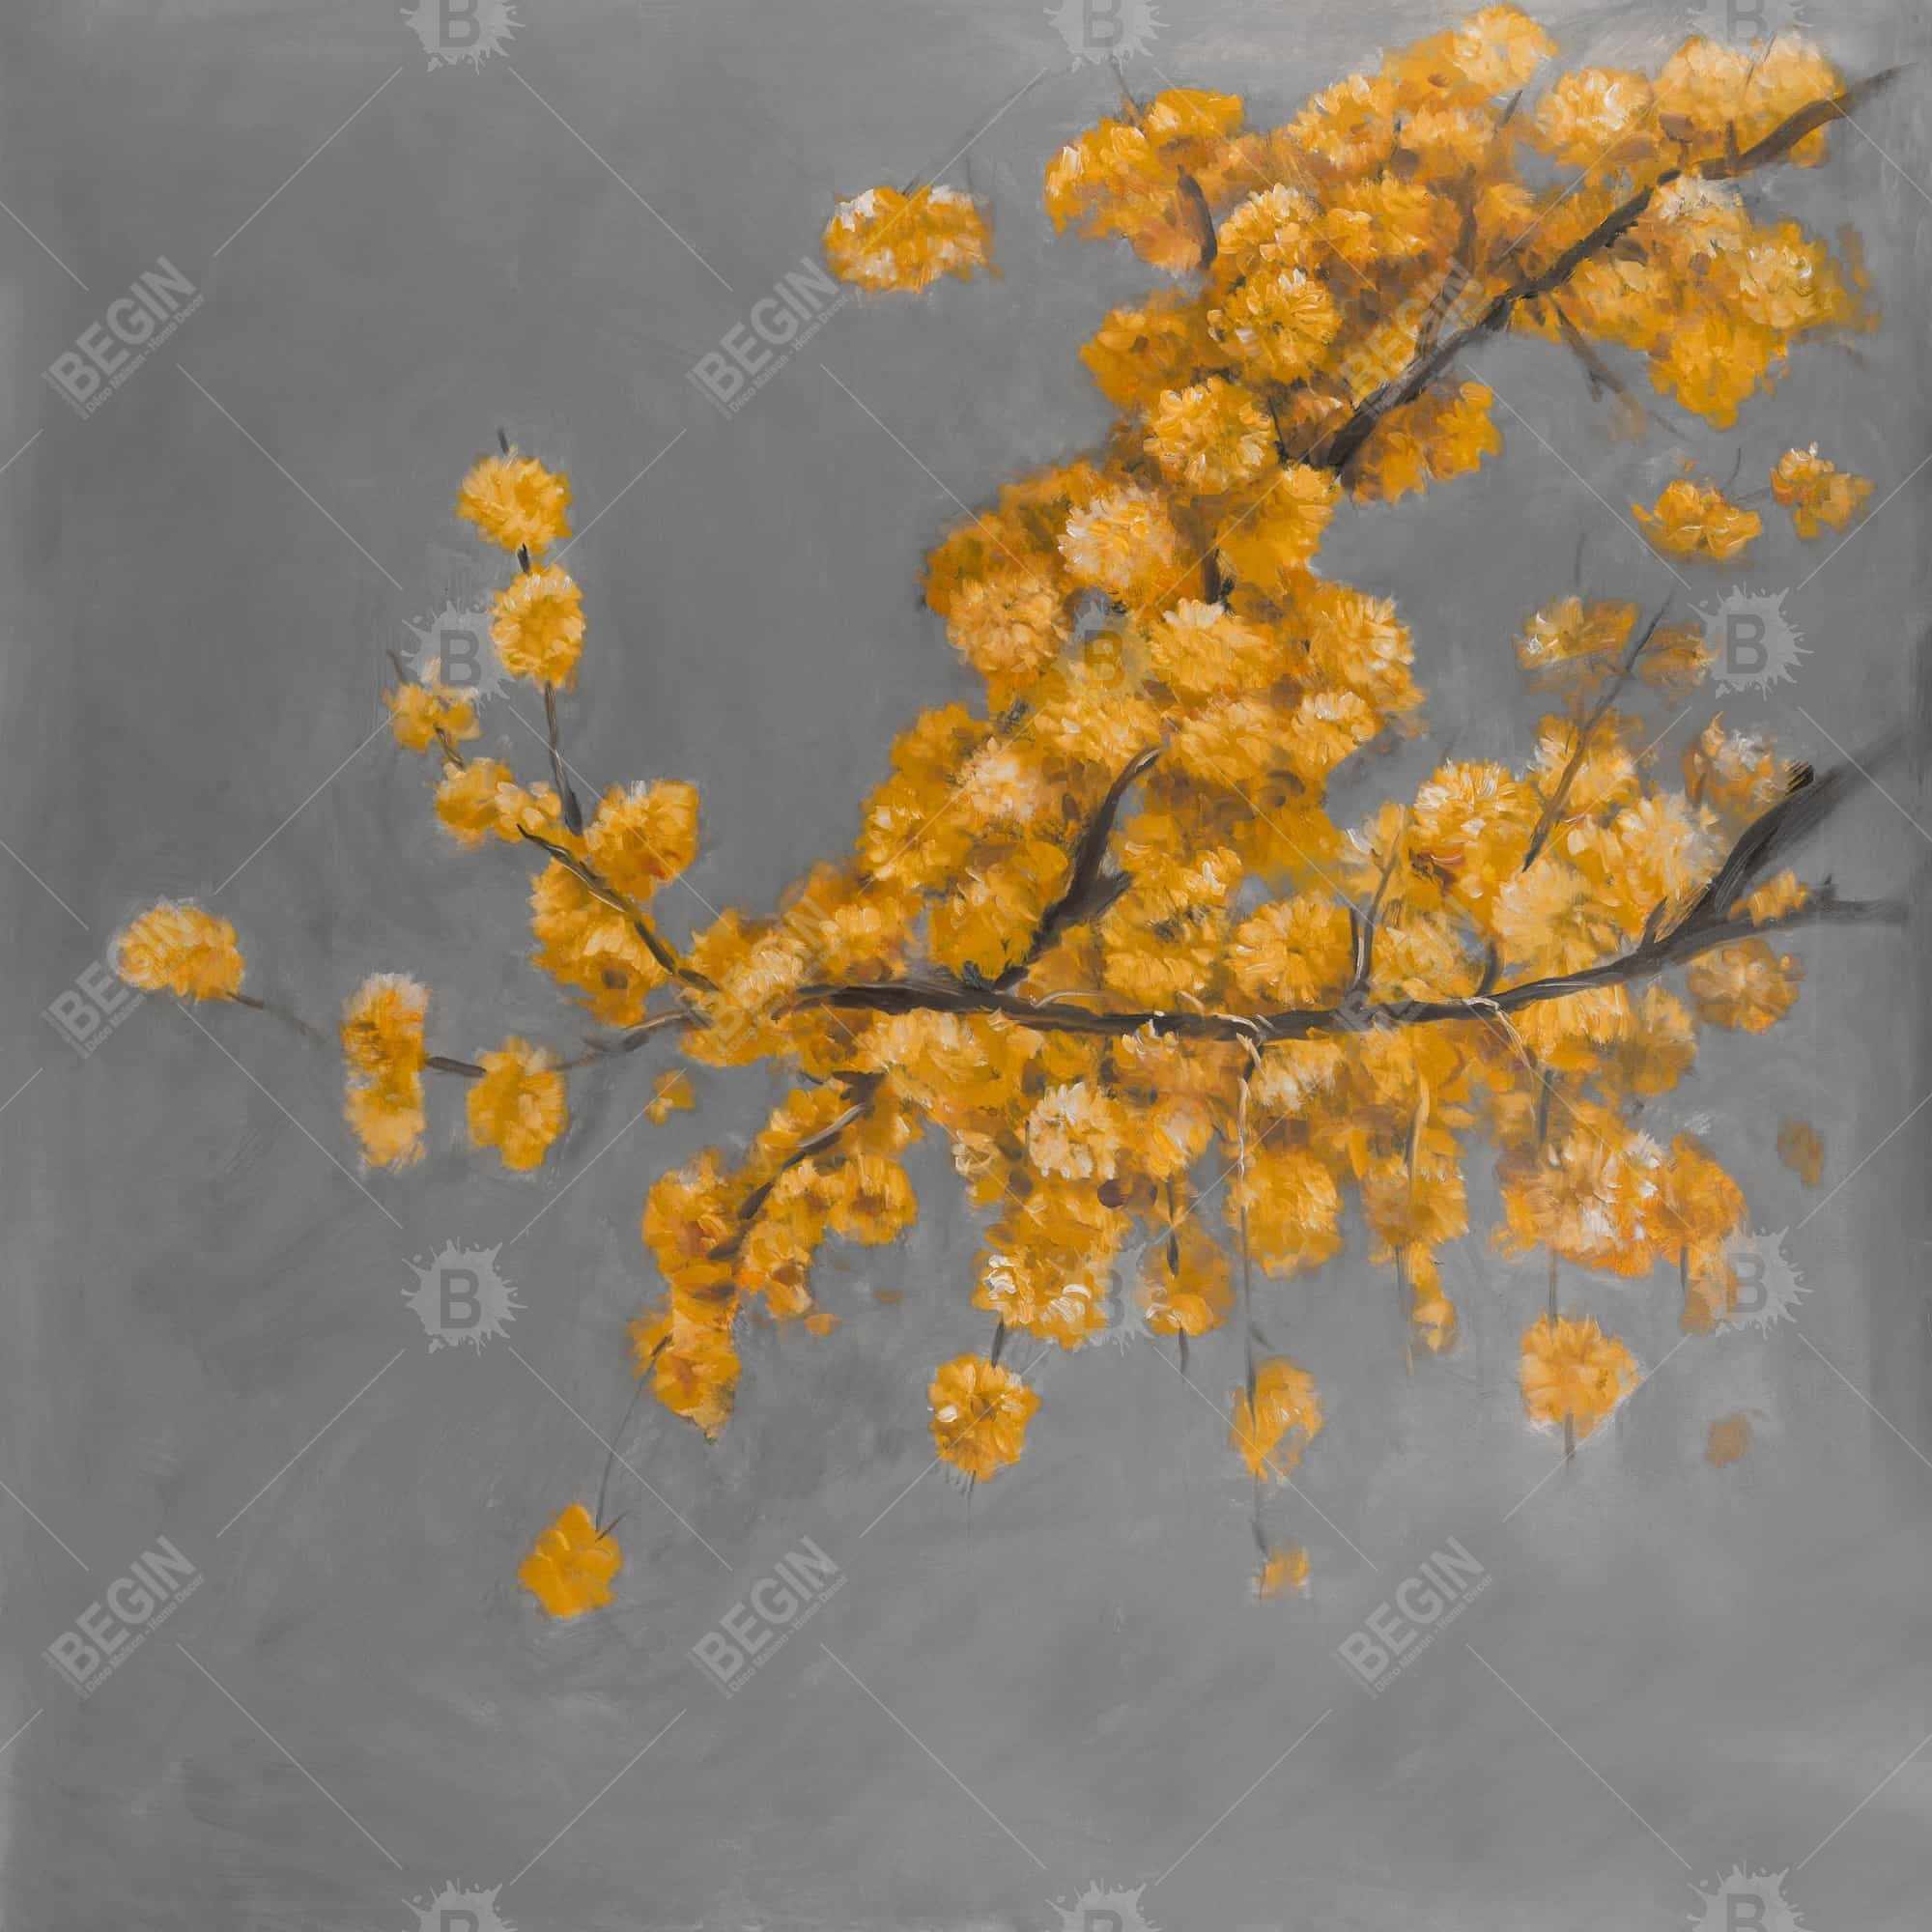 Golden wattle plant with pugg ball flowers